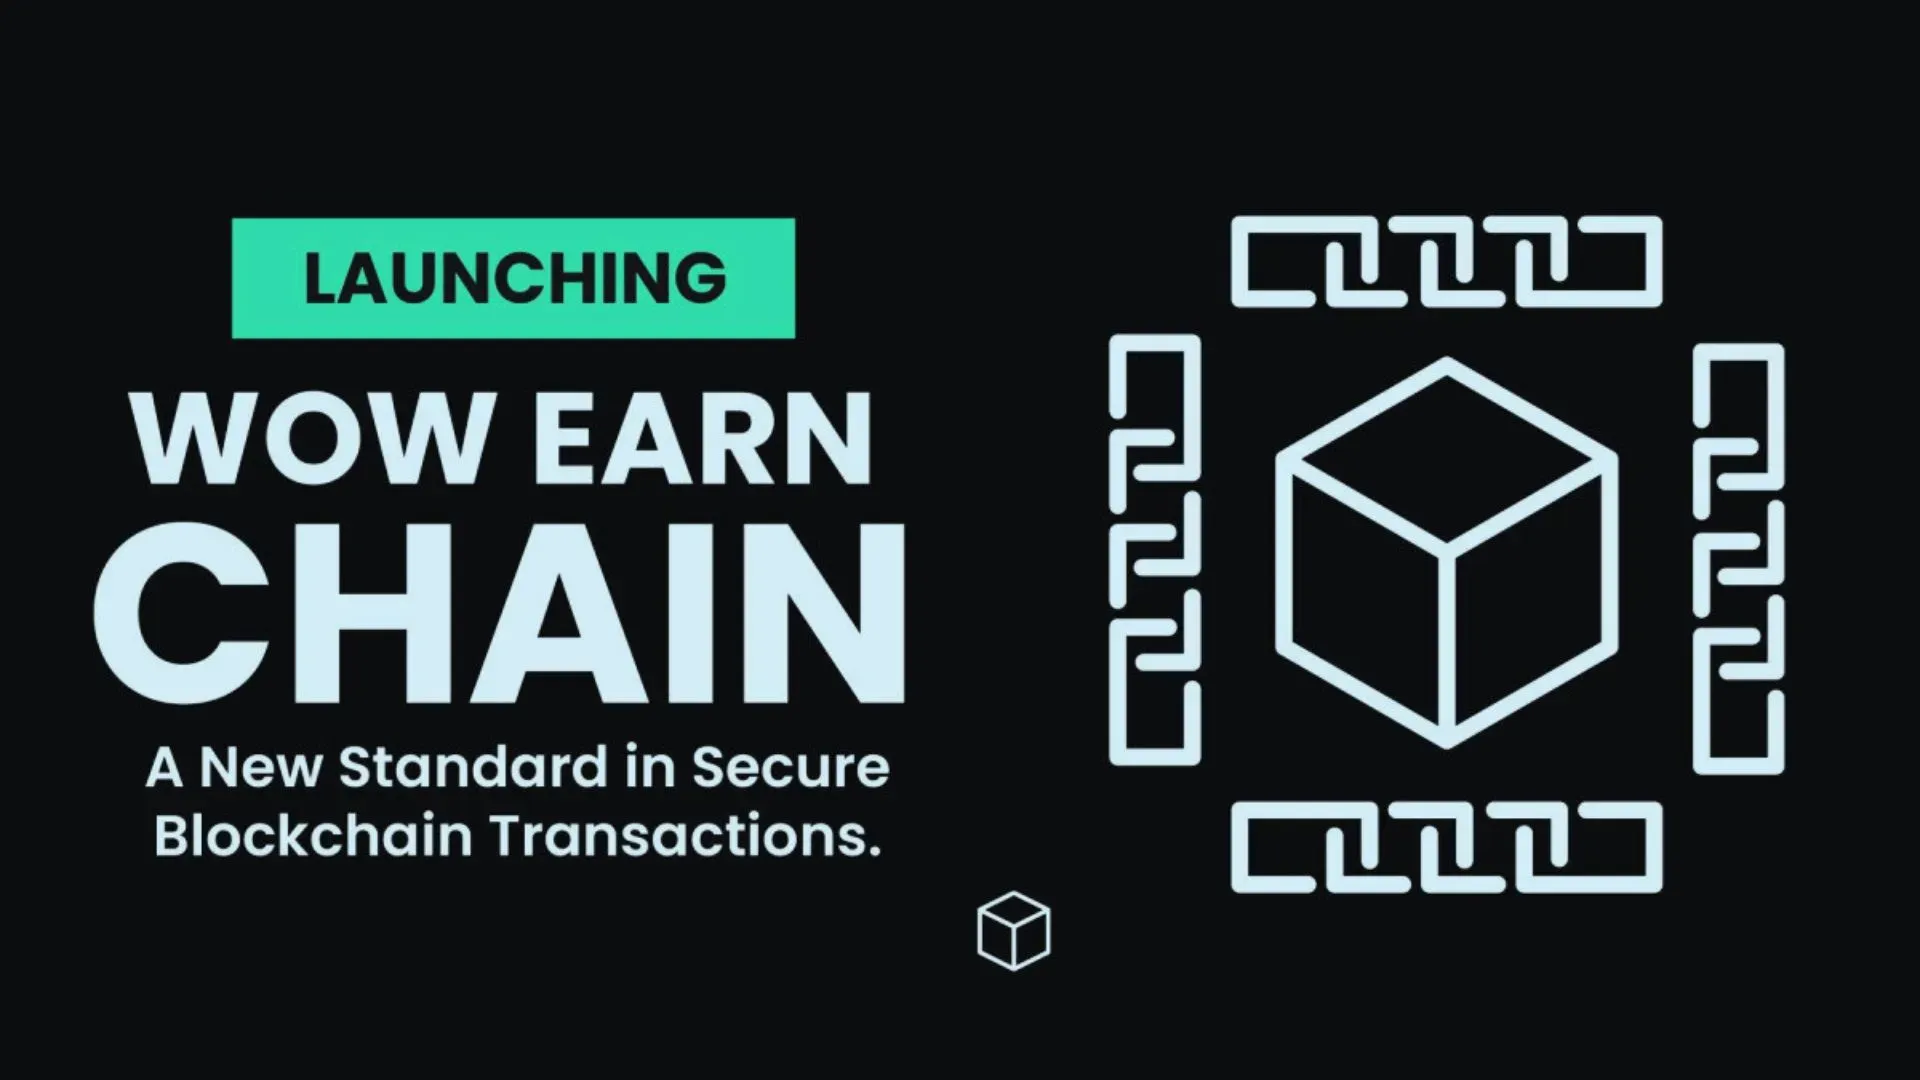 WOW EARN Launches Layer 1 Chain, Elevating Blockchain Tech